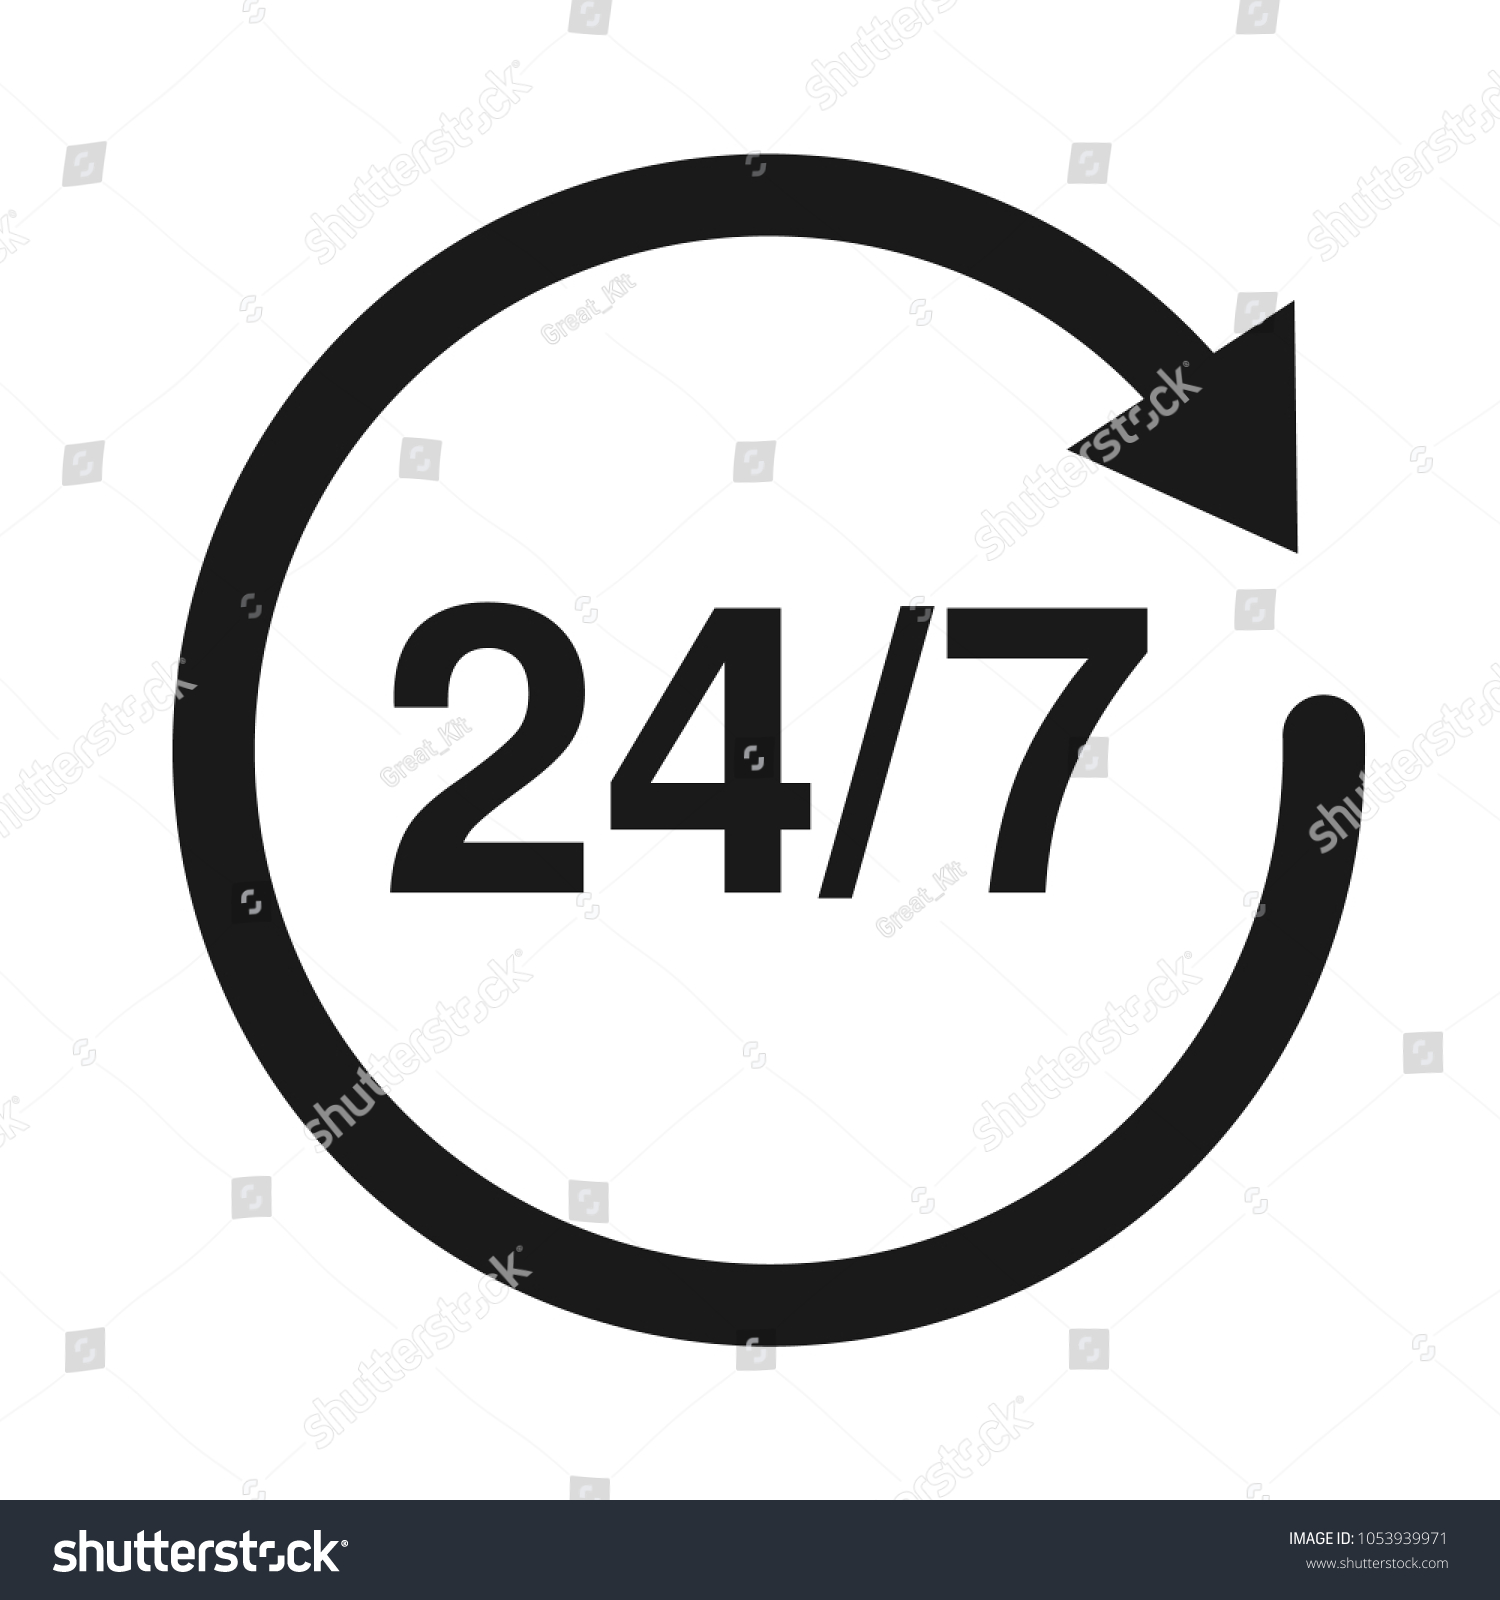 24/7 Service open 24h hours a day and 7 days a week. Flat isolated vector illustration in black on a white background. #1053939971